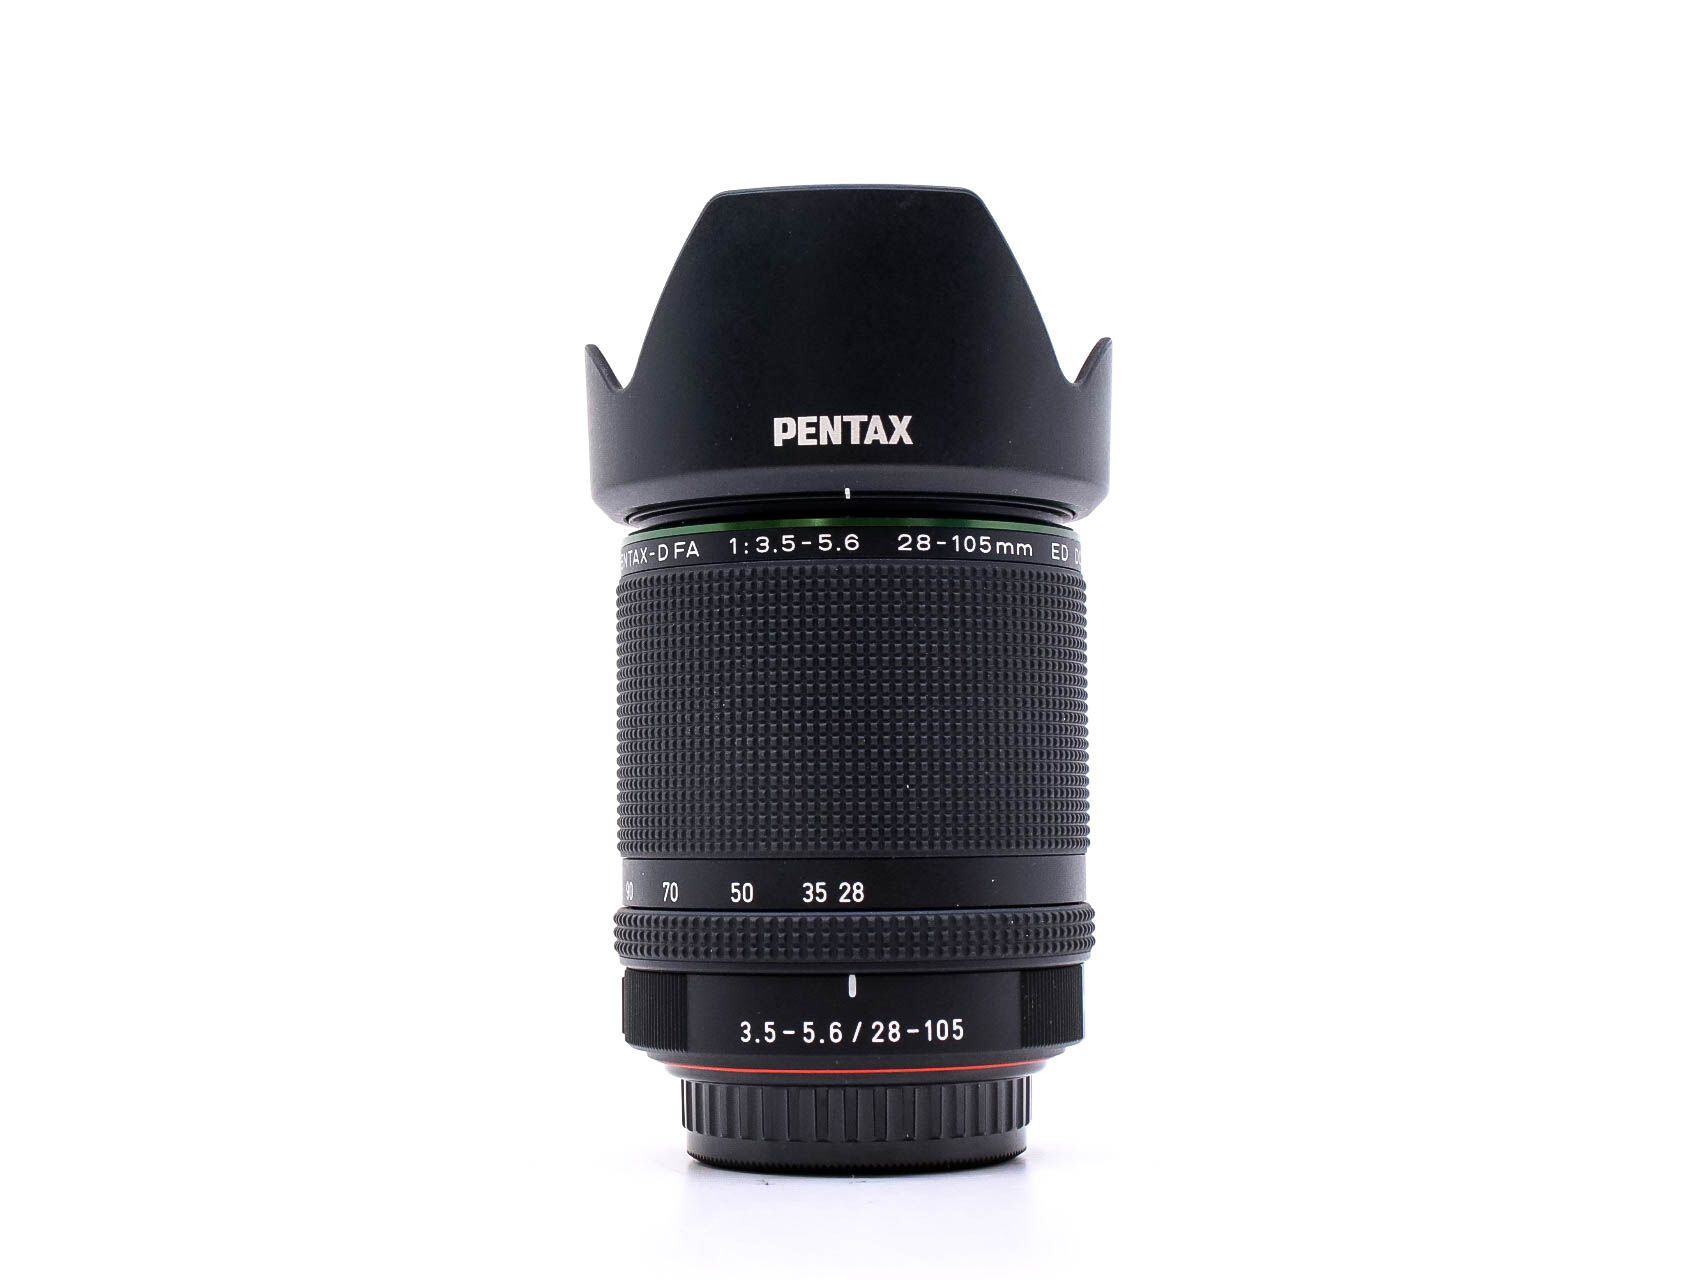 Pentax HD -D FA 28-105mm f/3.5-5.6 ED DC WR (Condition: Like New)